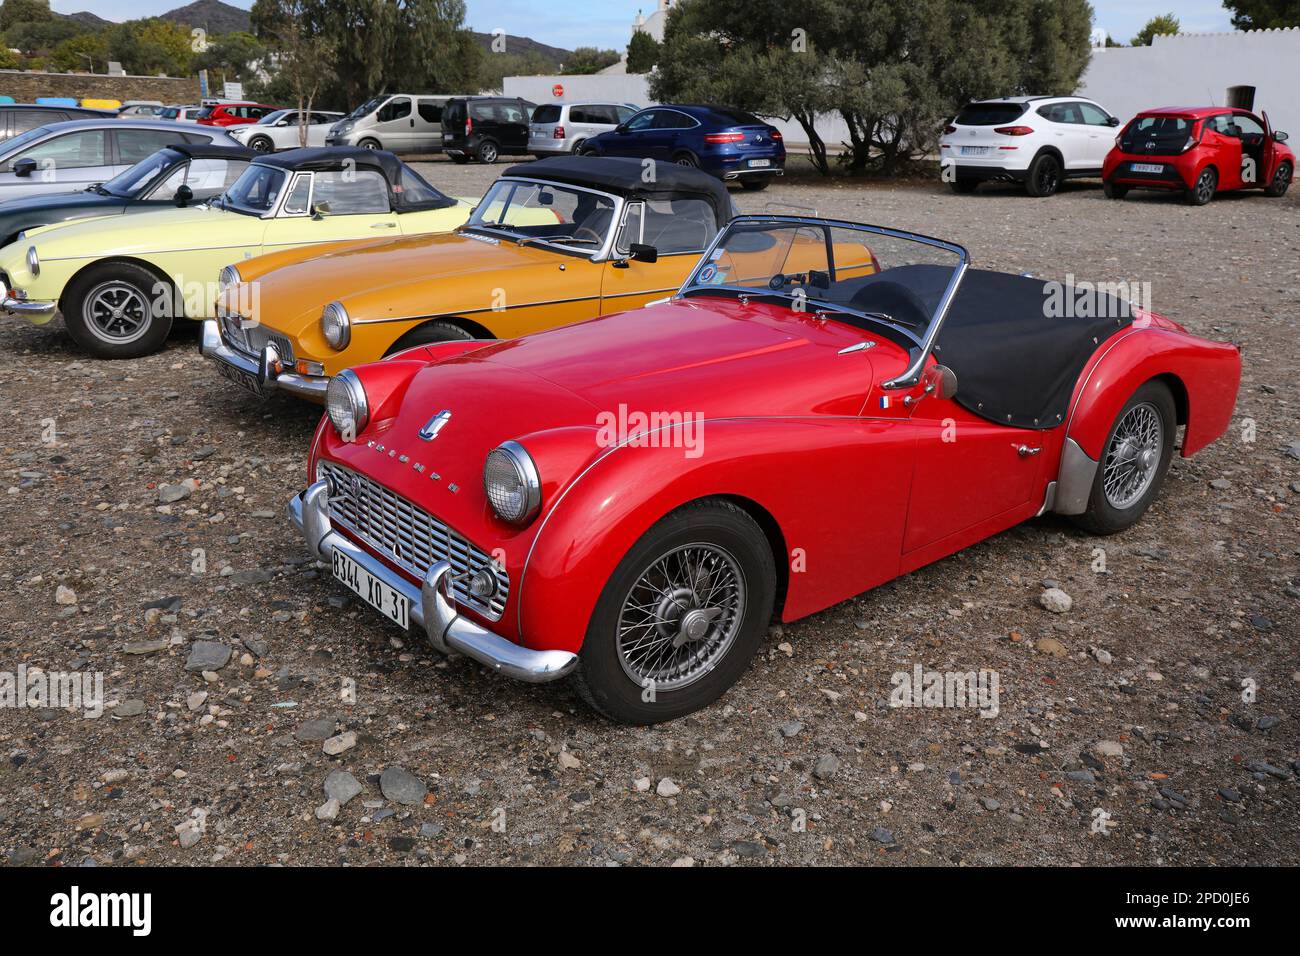 CADAQUES, SPAIN - OCTOBER 5, 2021: Triumph TR2 red roadster sports car parked in Spain. Stock Photo